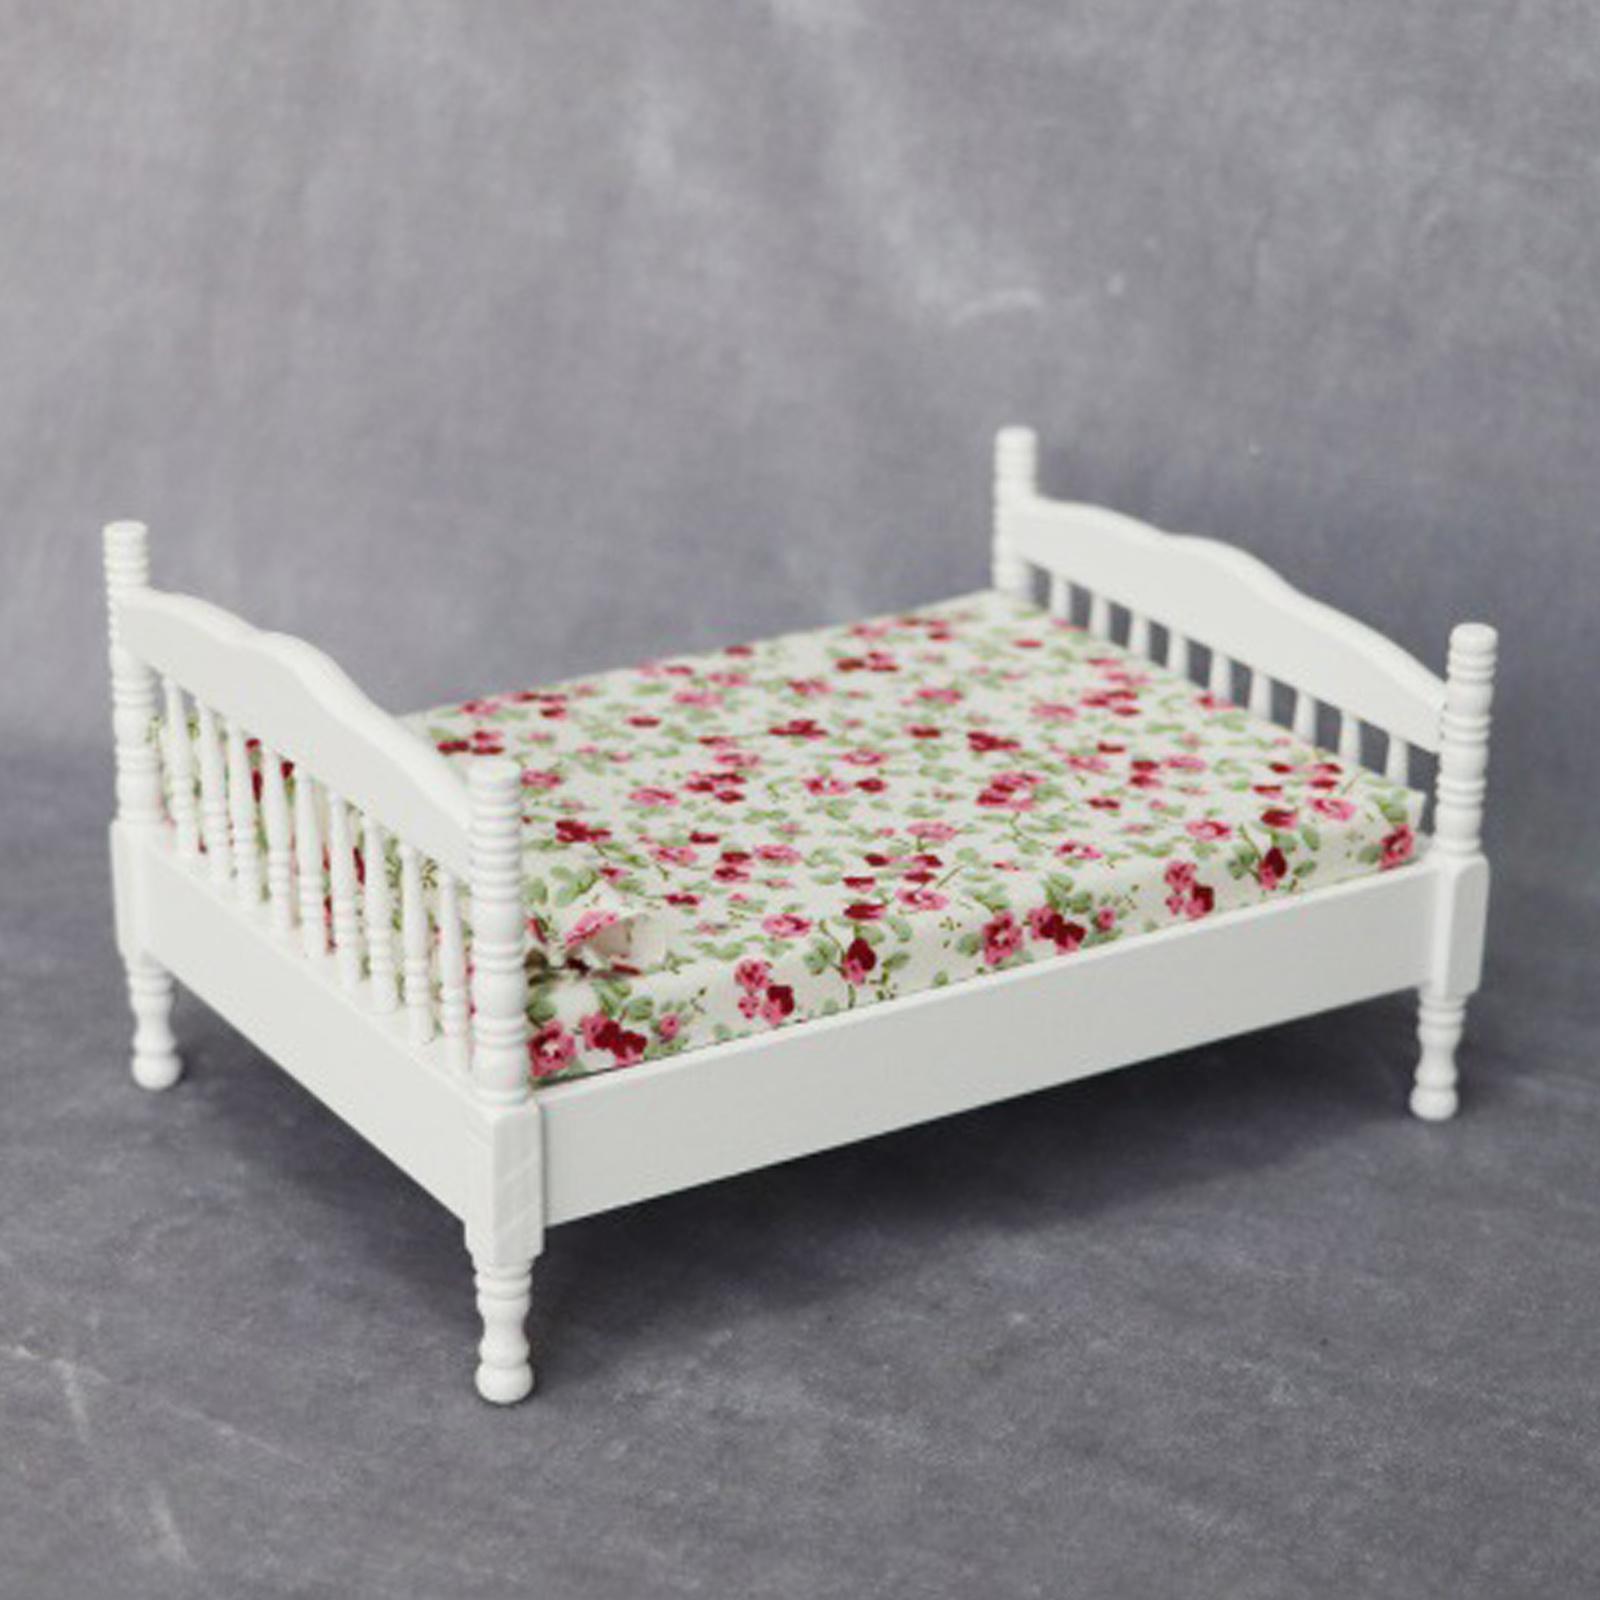 1:12 Doll House Miniature Bed Scale Tiny Decor Wood for Doll House Furnish